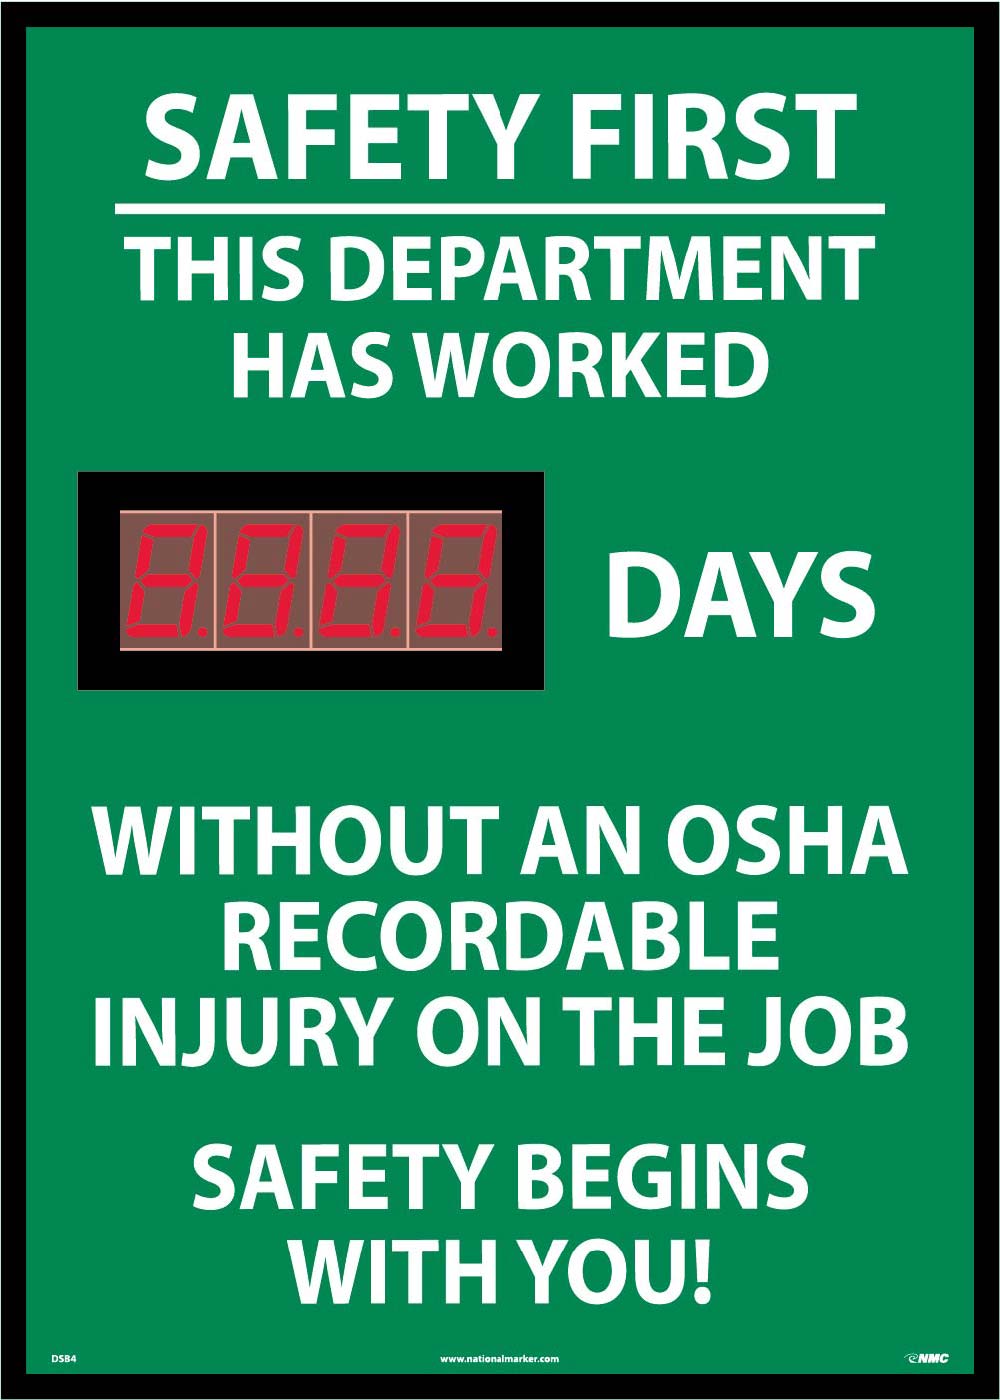 Safety First This Department Has Worked Digital Scoreboard-eSafety Supplies, Inc